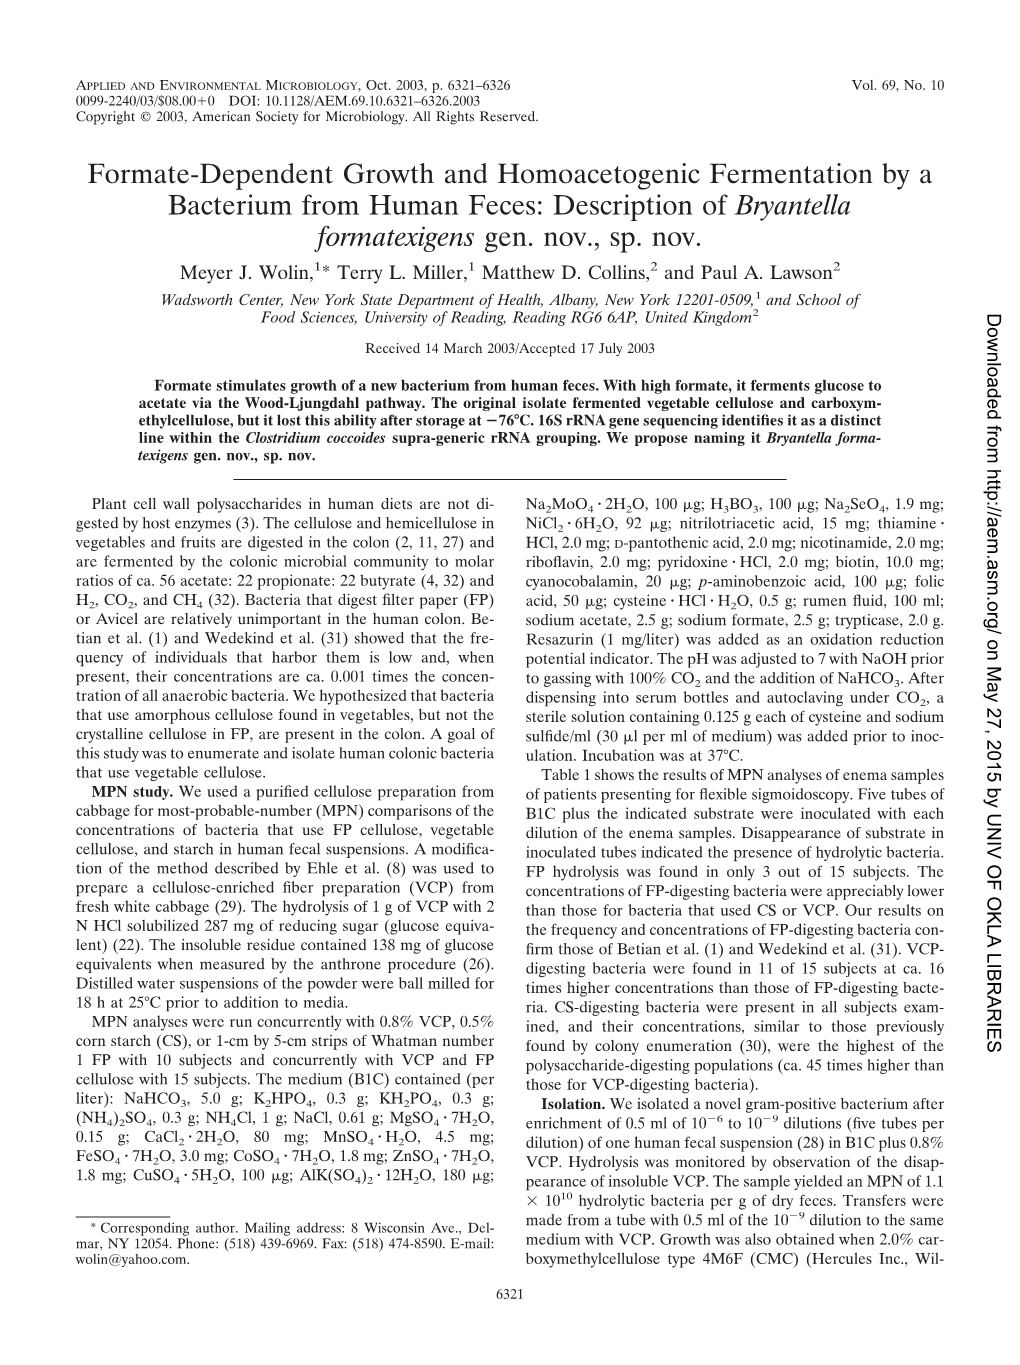 Formate-Dependent Growth and Homoacetogenic Fermentation by a Bacterium from Human Feces: Description of Bryantella Formatexigens Gen